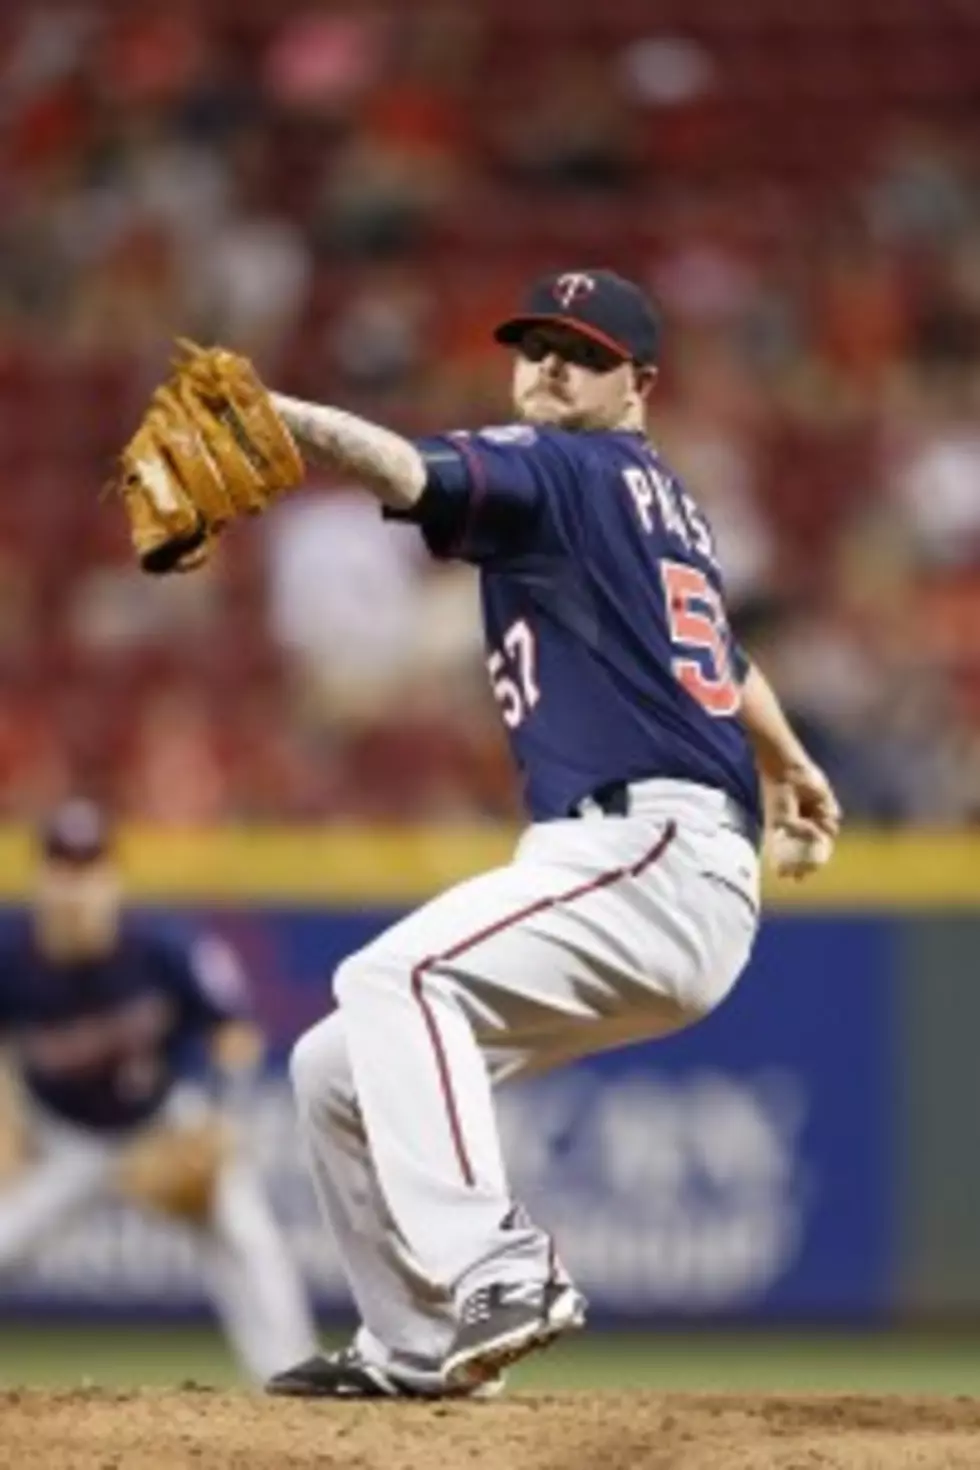 Rough Outing for Pelfrey Leads to Twins Loss